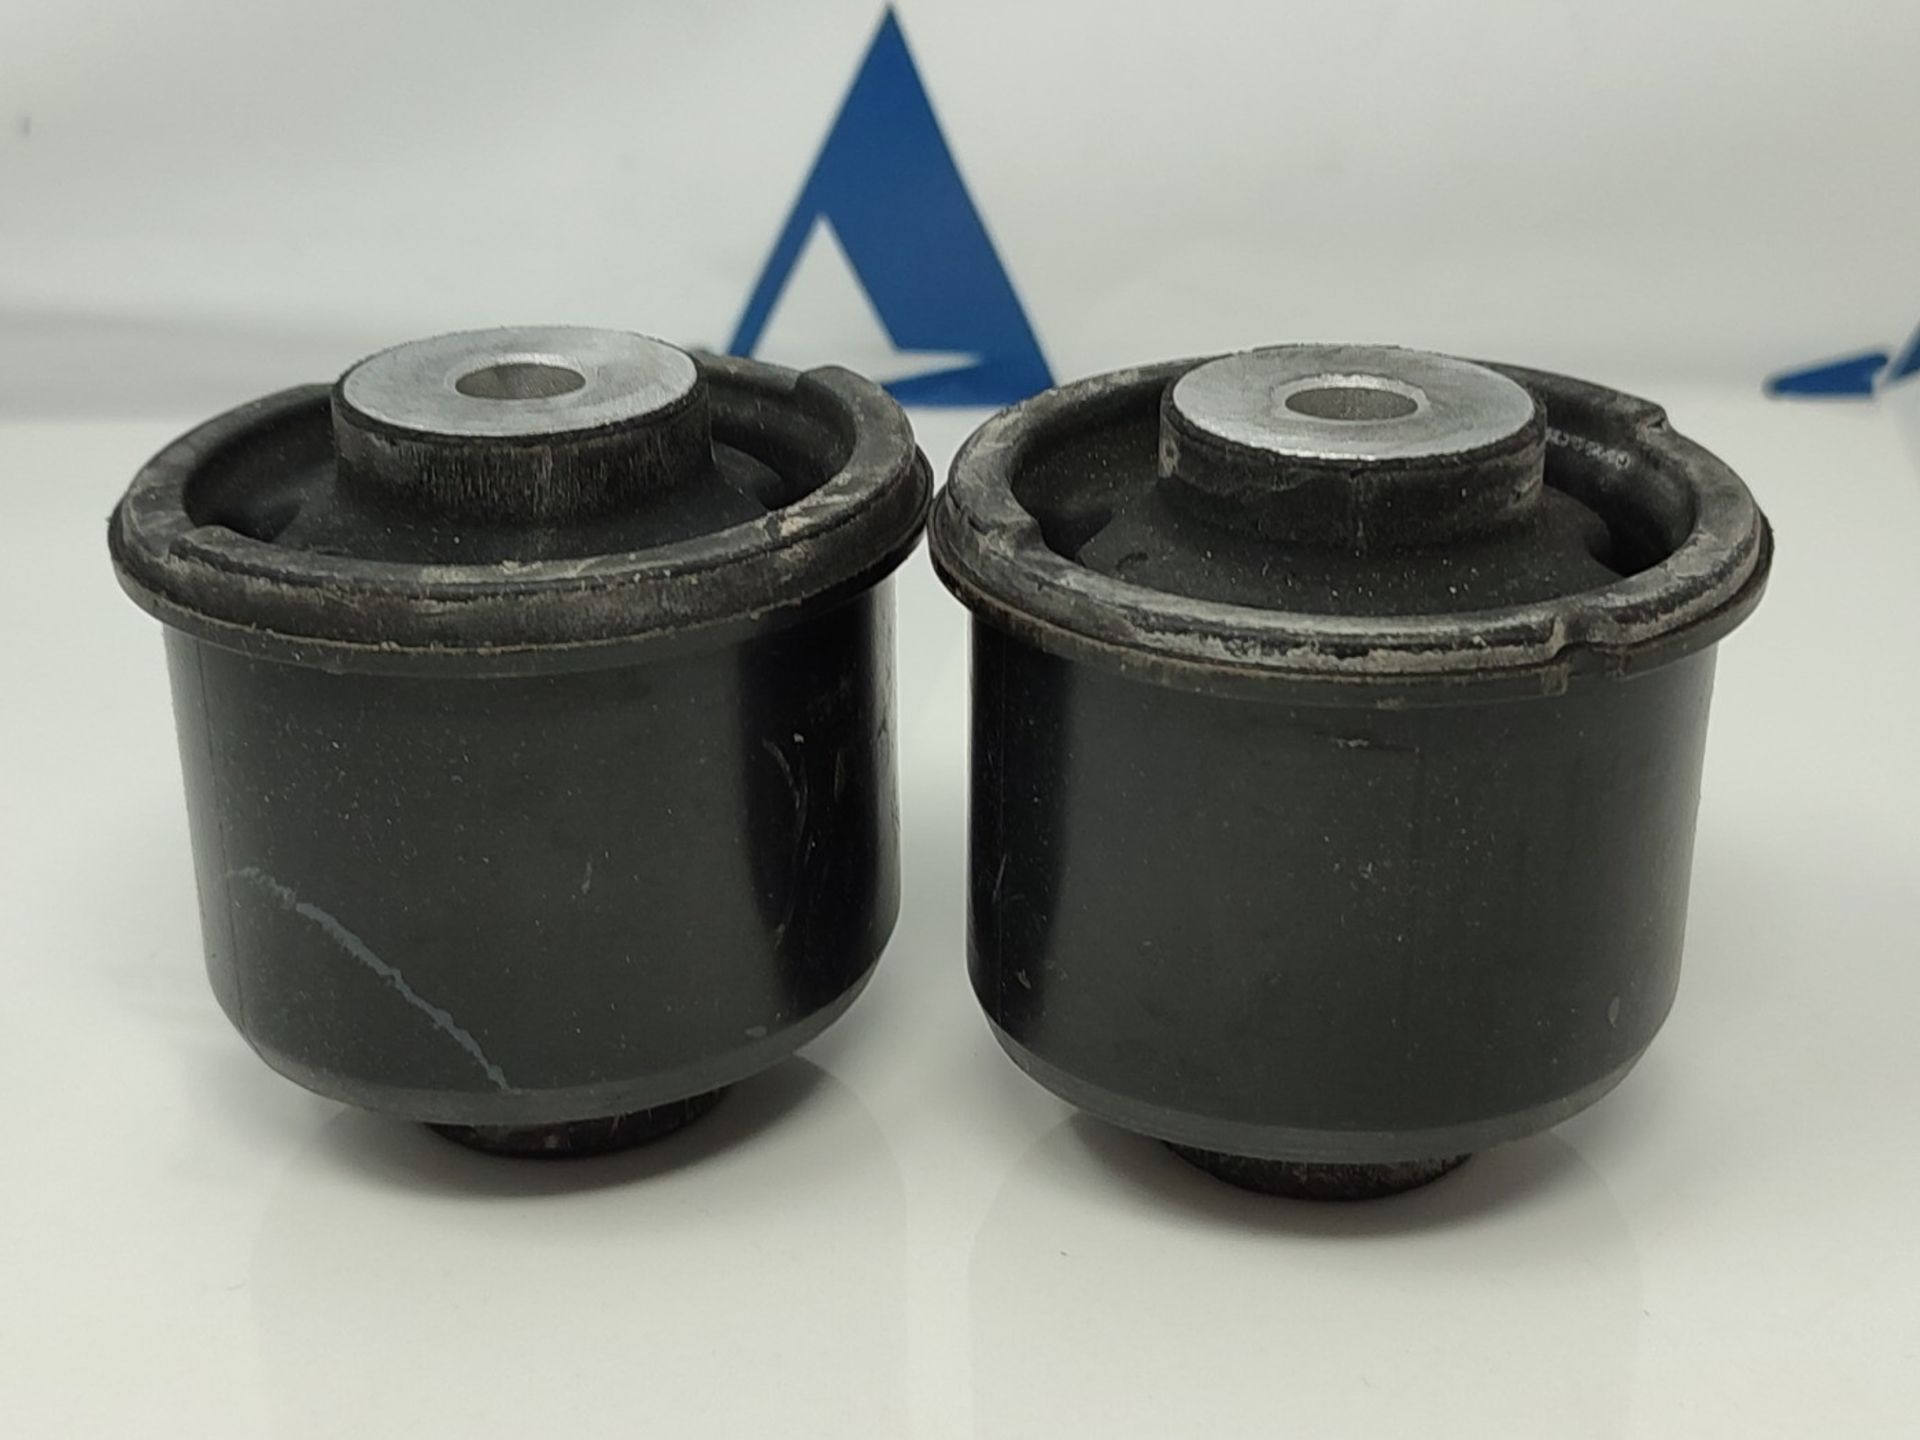 BIAREN 2X Rear Axle Beam Mounting Bushes Suspension for Ford Fiesta Mk7 B-Max (2008-20 - Image 2 of 2